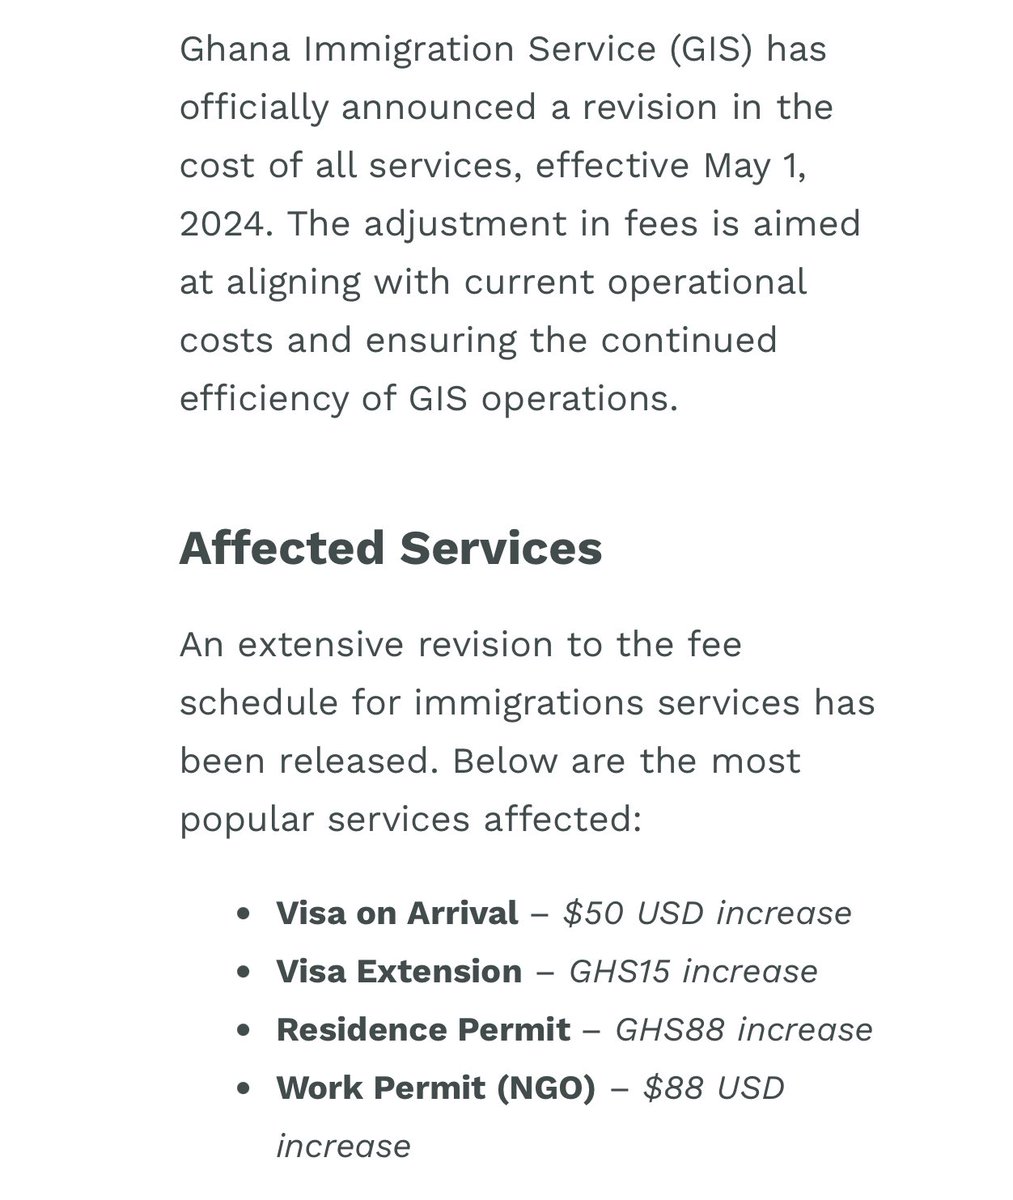 Ghana Immigration Service (GIS) has officially announced a revision in the cost of all services, effective May 1, 2024.